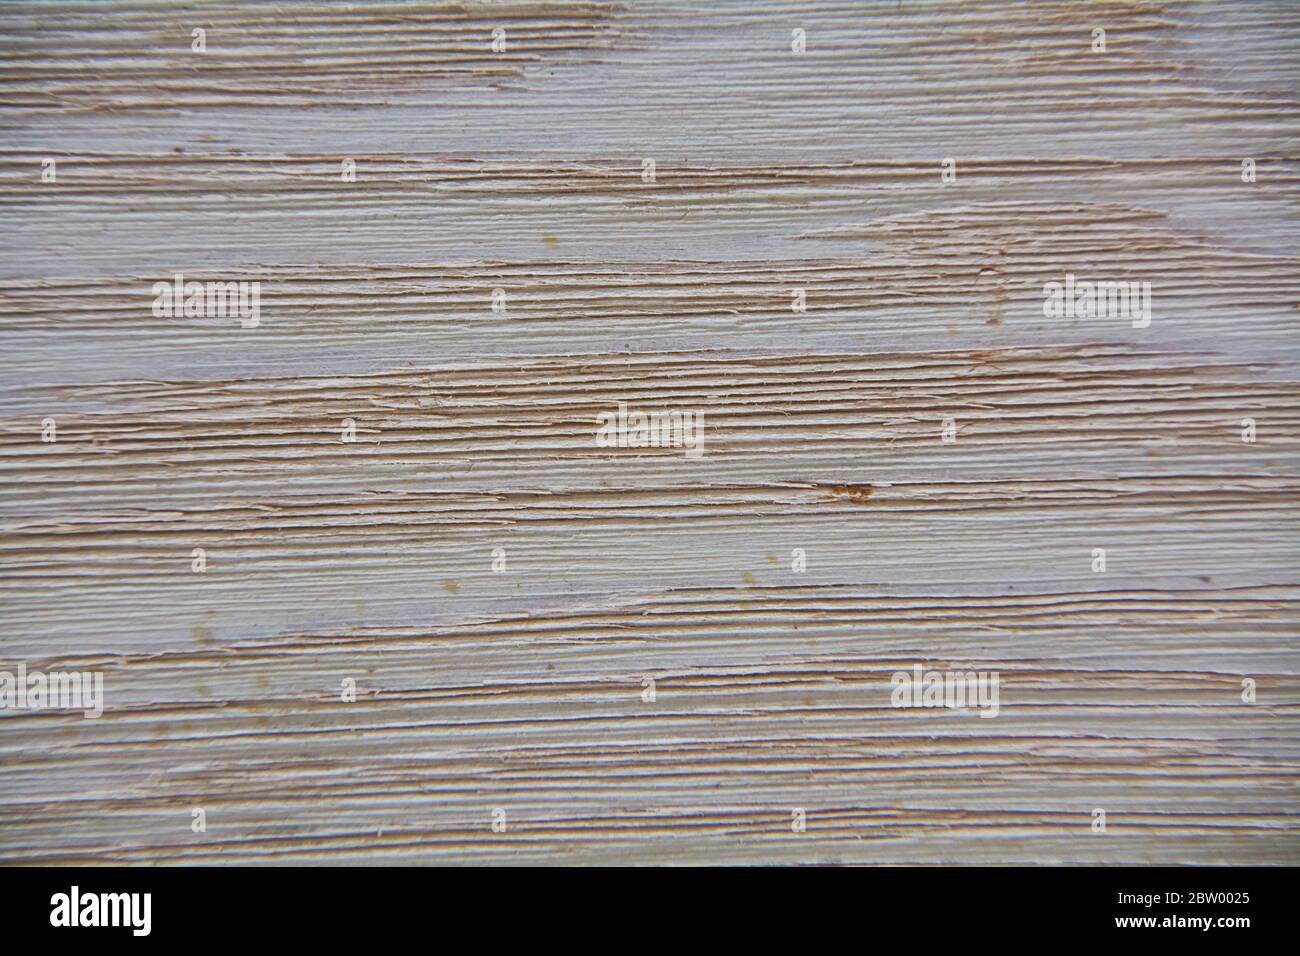 Texture of a light wood surface with darker and more visible veins: image suitable for use in high-definition graphic projects. Stock Photo